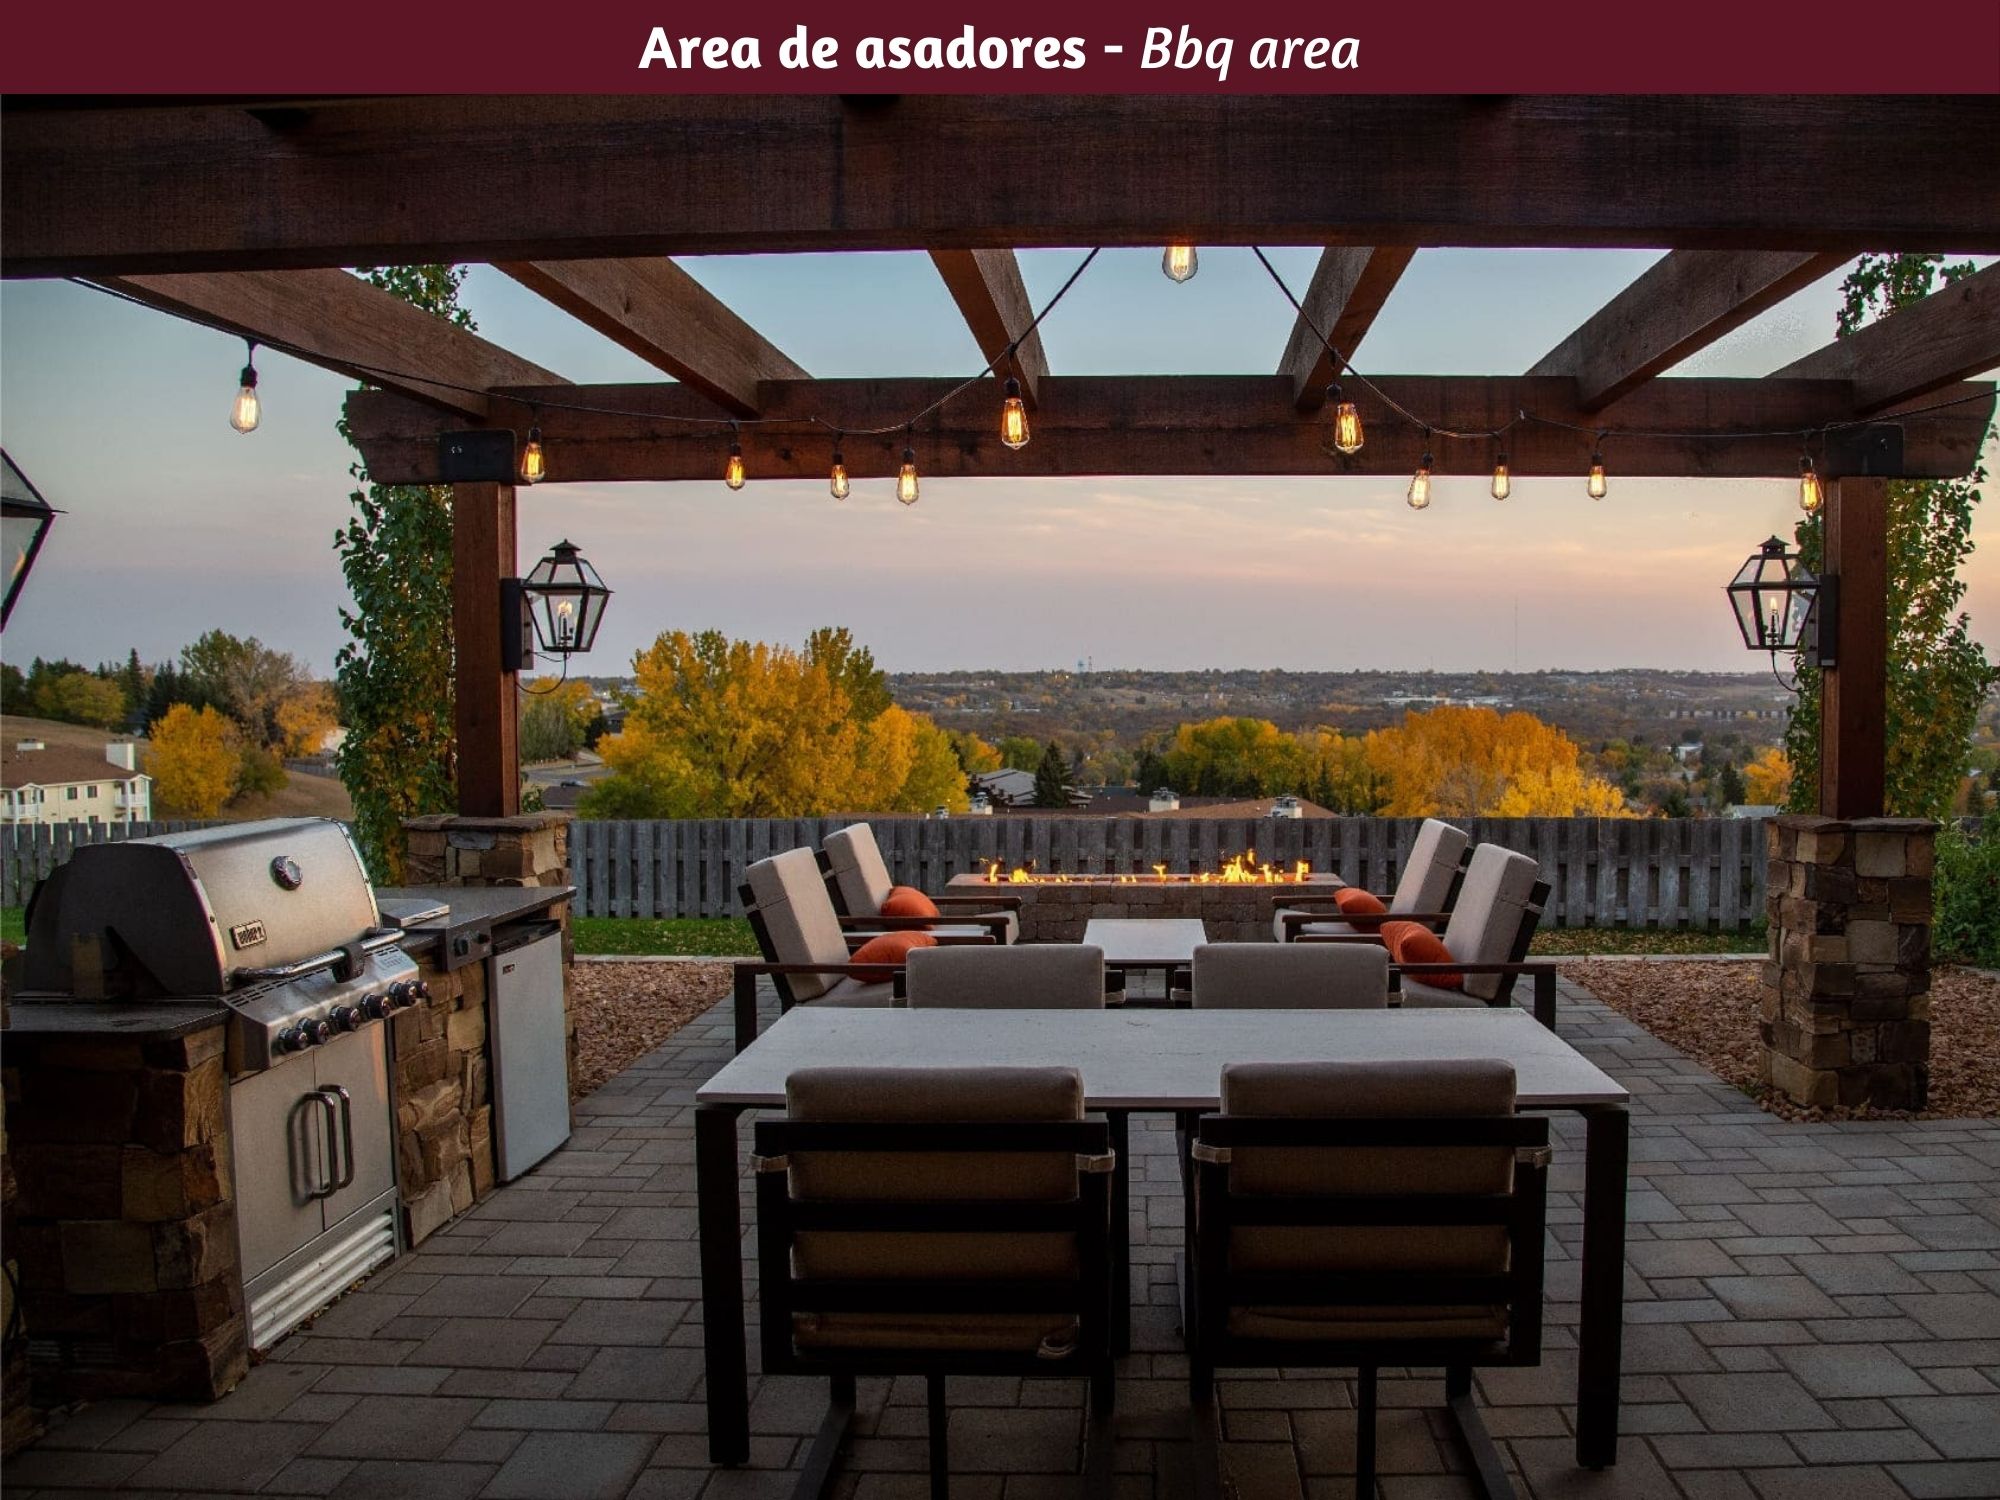 561 sqm lot, clubhouse, pool, gym, jacuzzi, for sale in San Miguel de Allende.